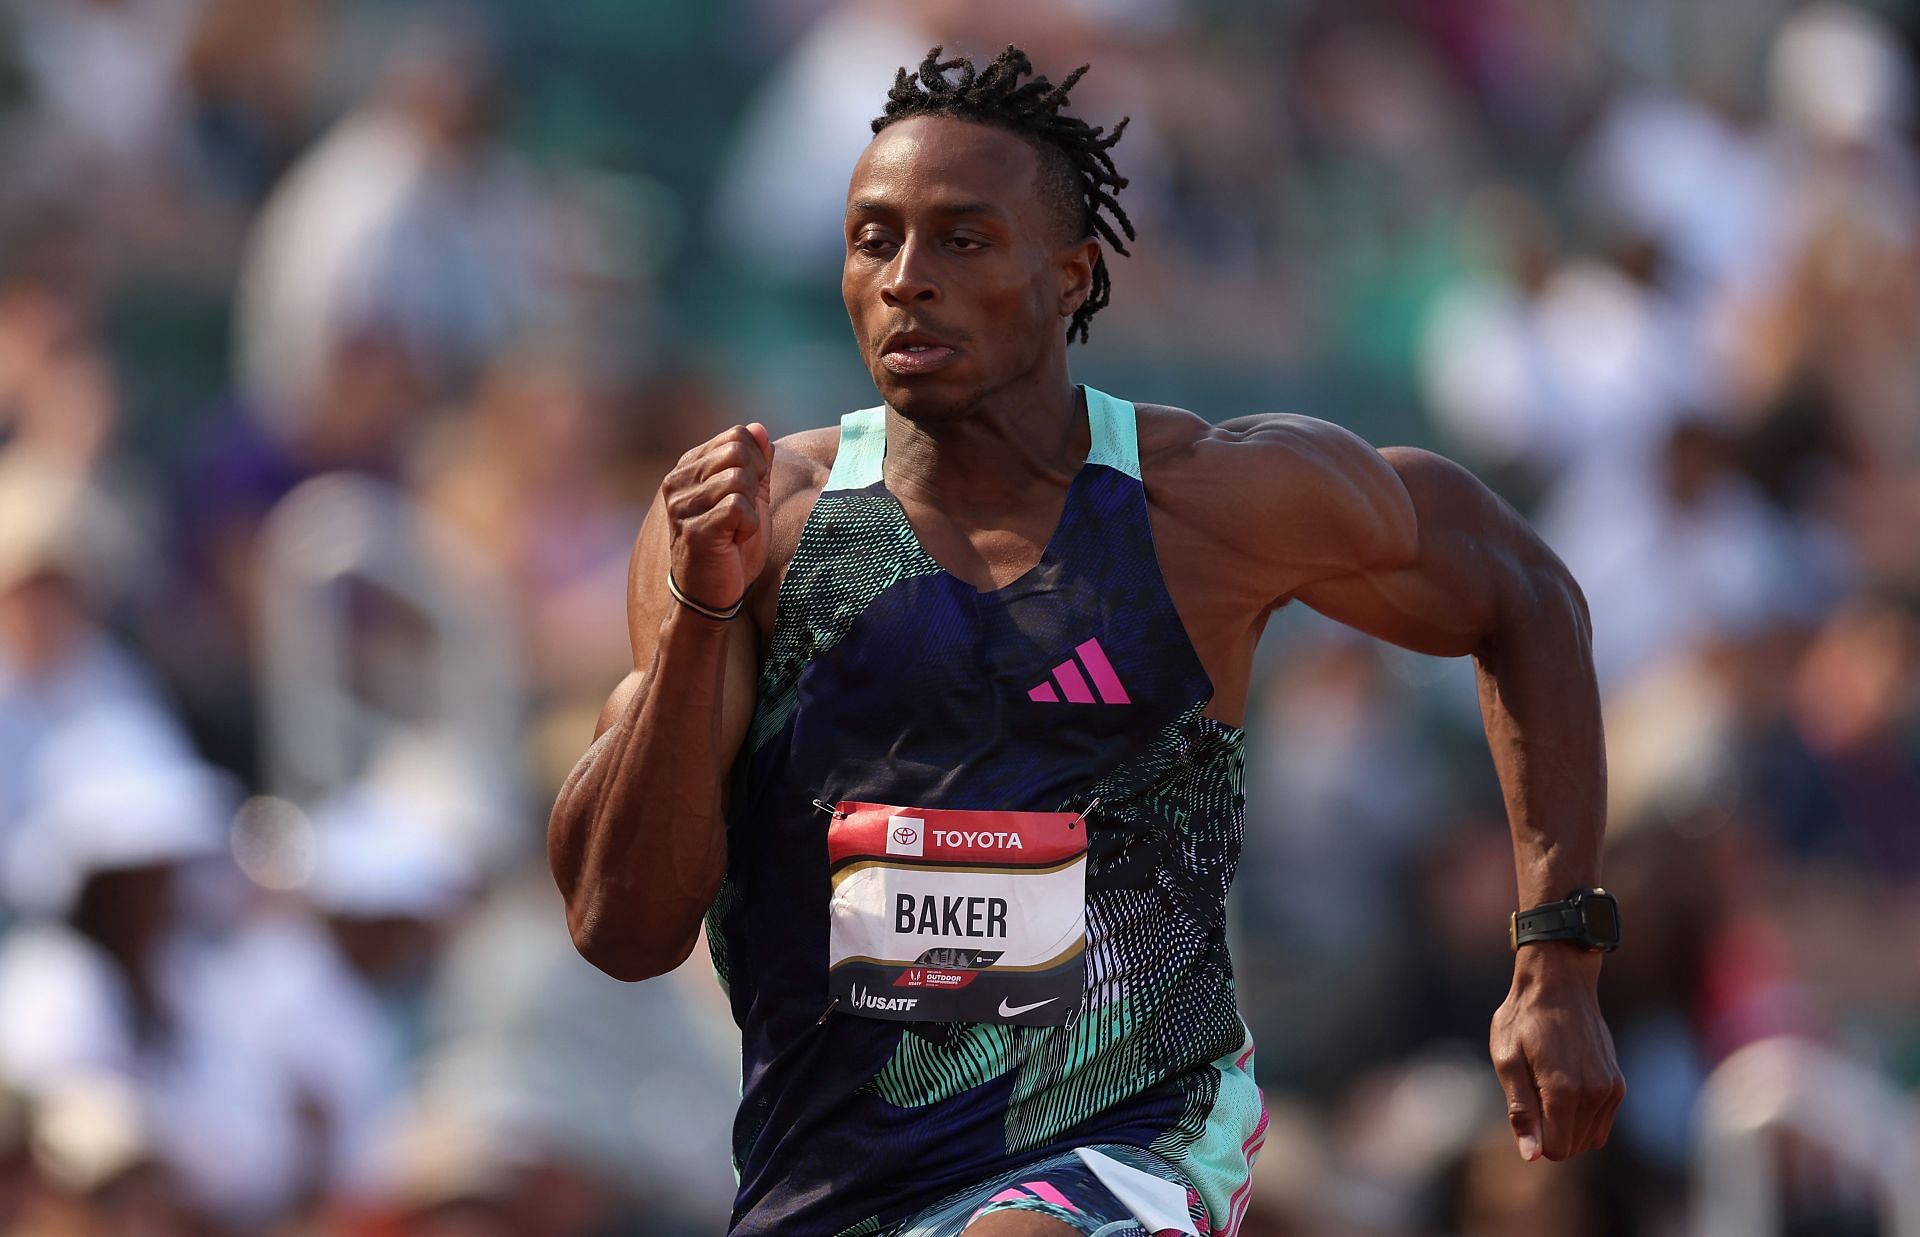 Ronnie Baker is among the athletes to look out for at the Jamaica Athletics Invitational.